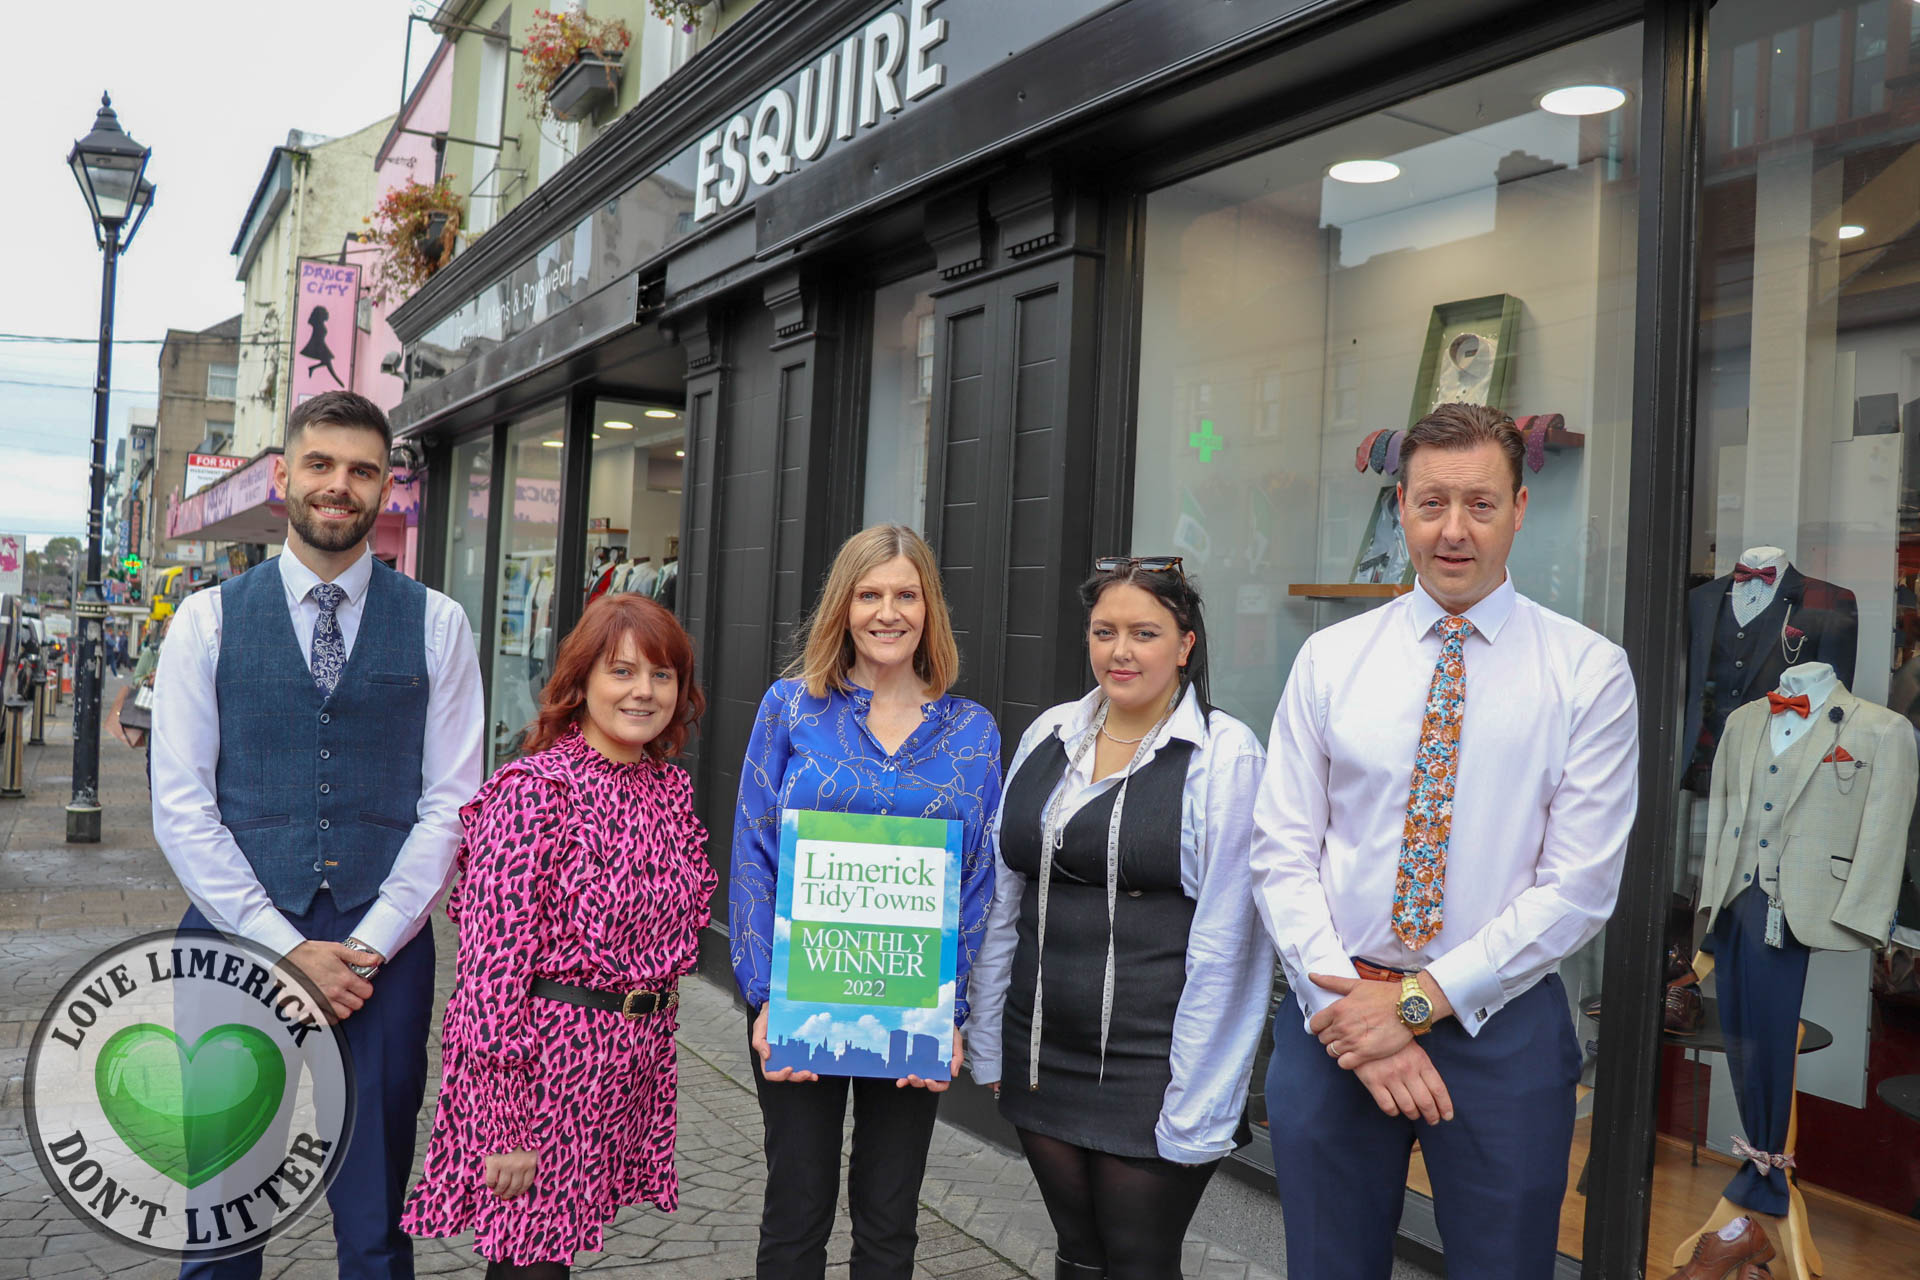 Limerick City Tidy Towns October 2022 Monthly Award goes to Esquire Formal Menswear